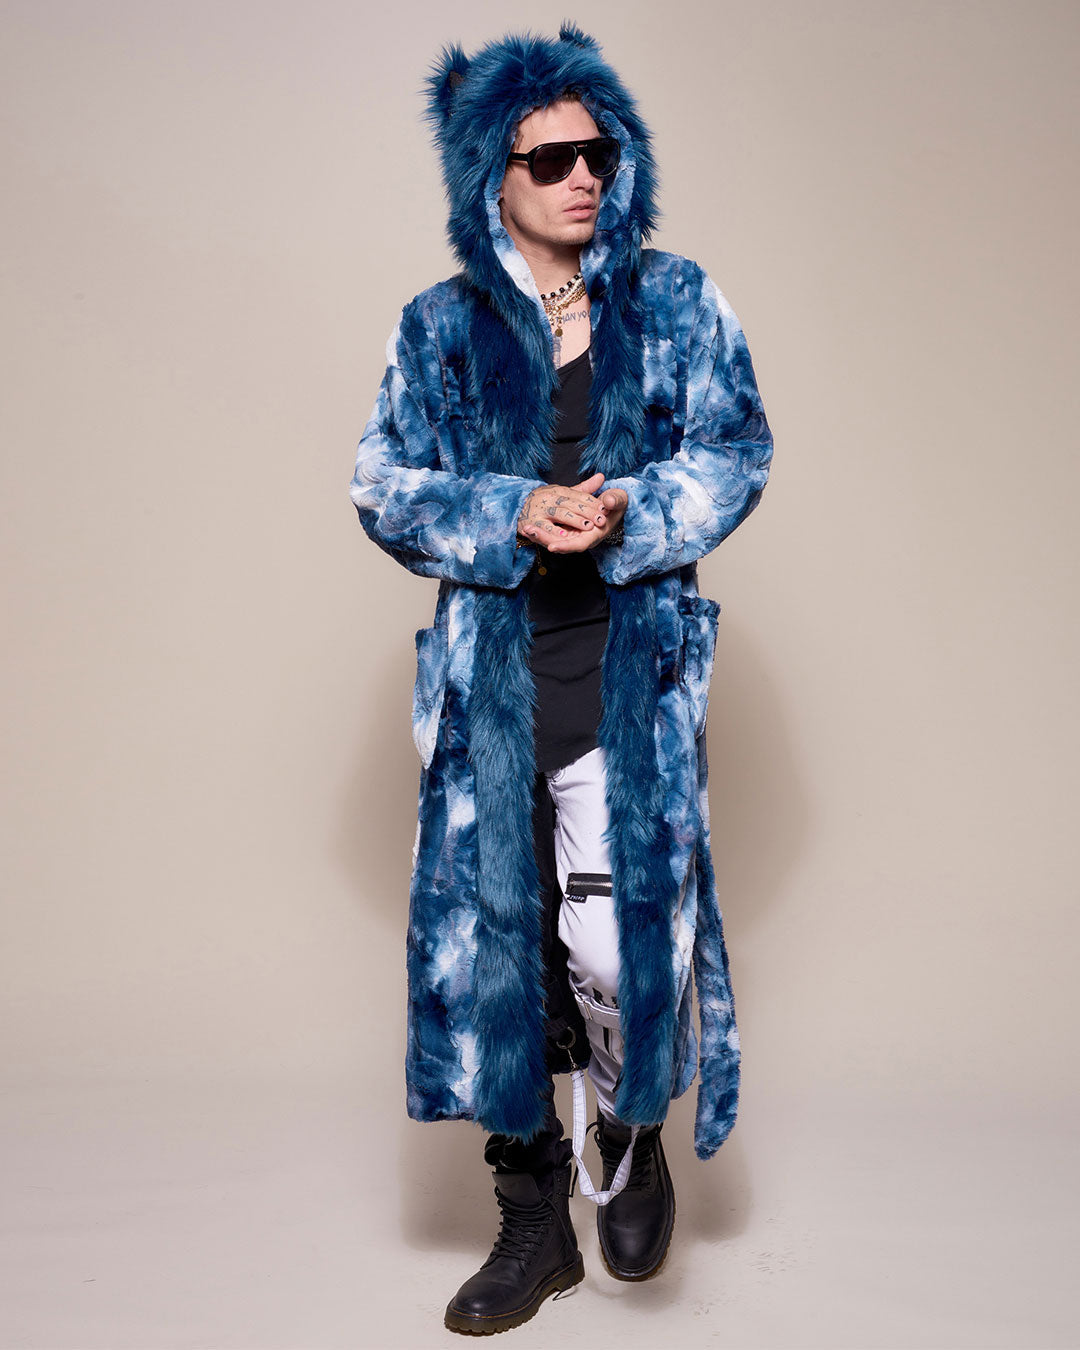 Classic Faux Fur Style Robe for Men in Water Wolf Design Worn Over Ripped Jeans | Men's - SpiritHoods